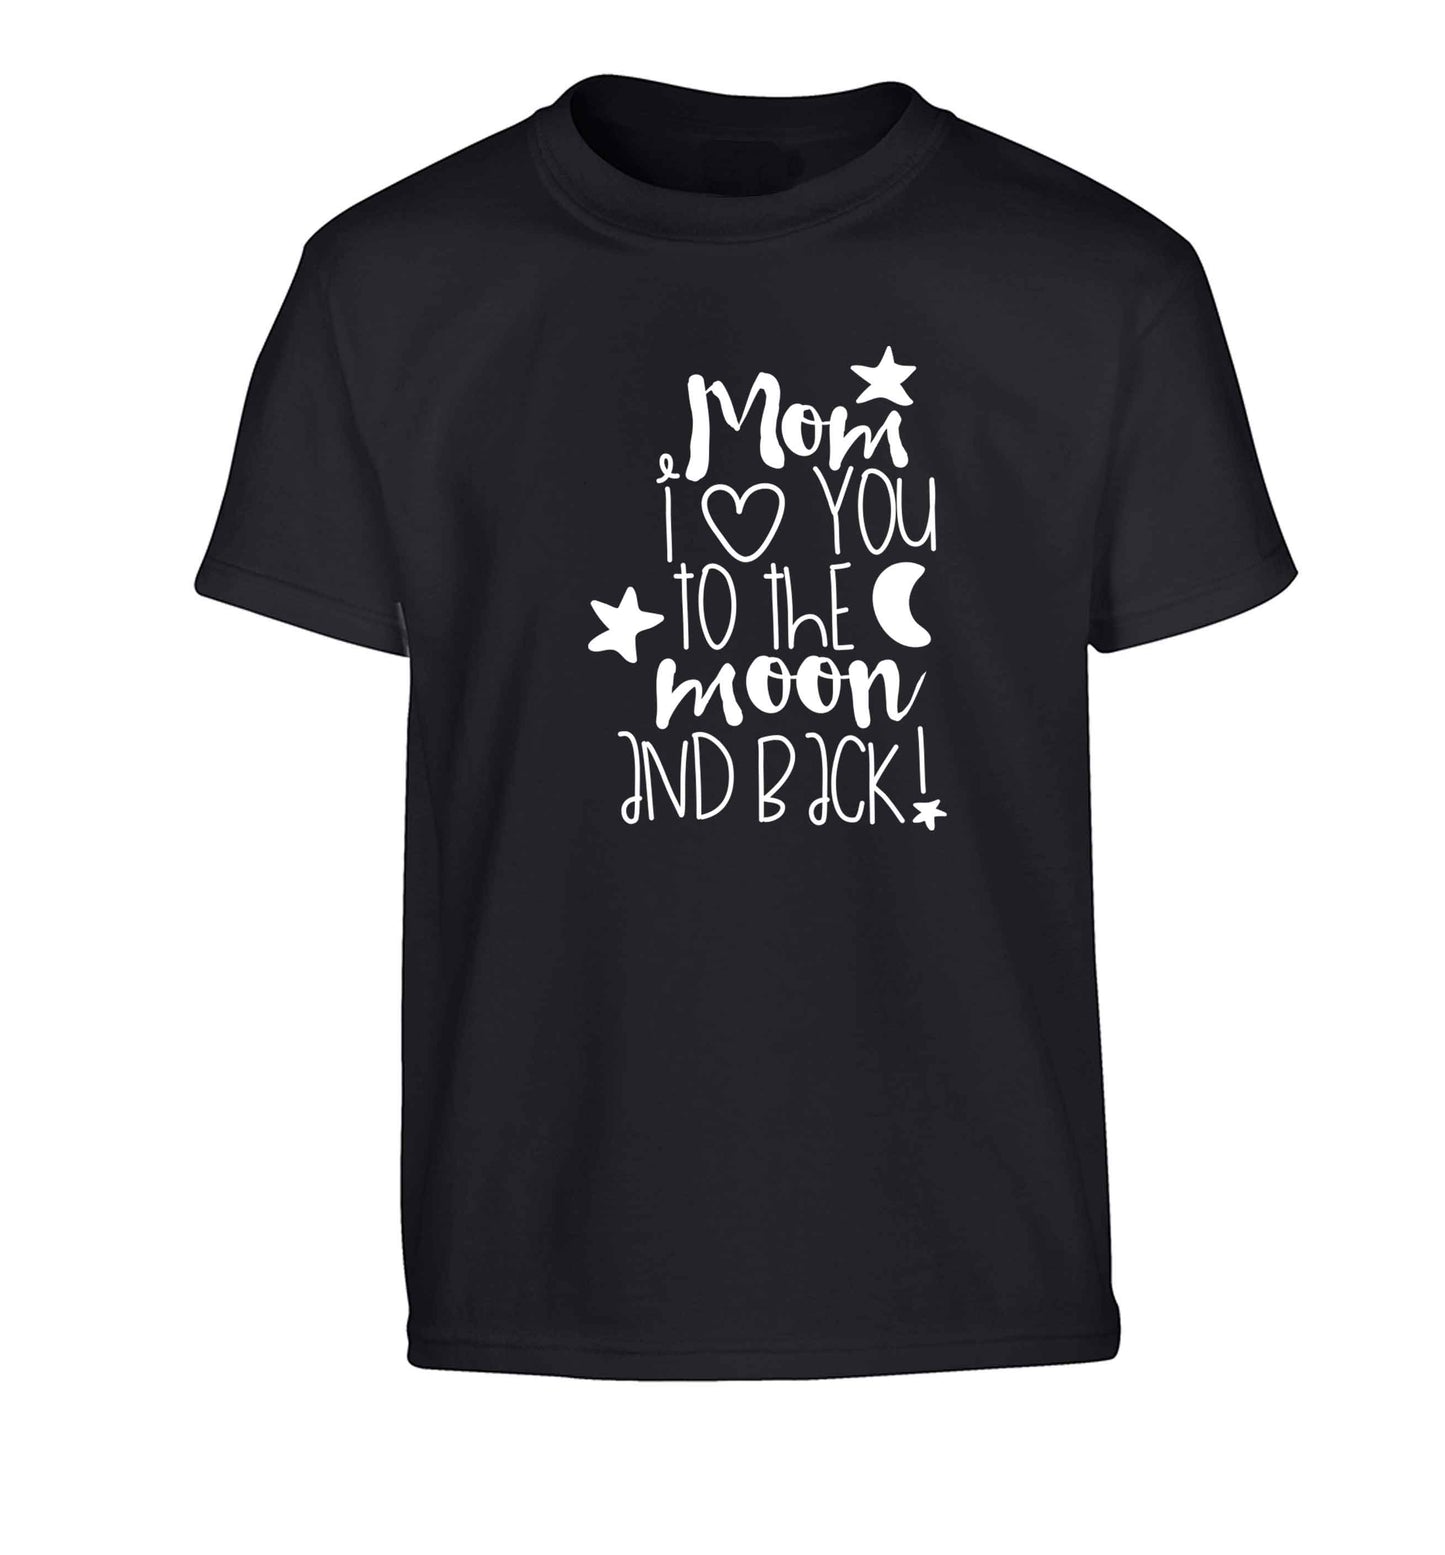 Mom I love you to the moon and back Children's black Tshirt 12-13 Years